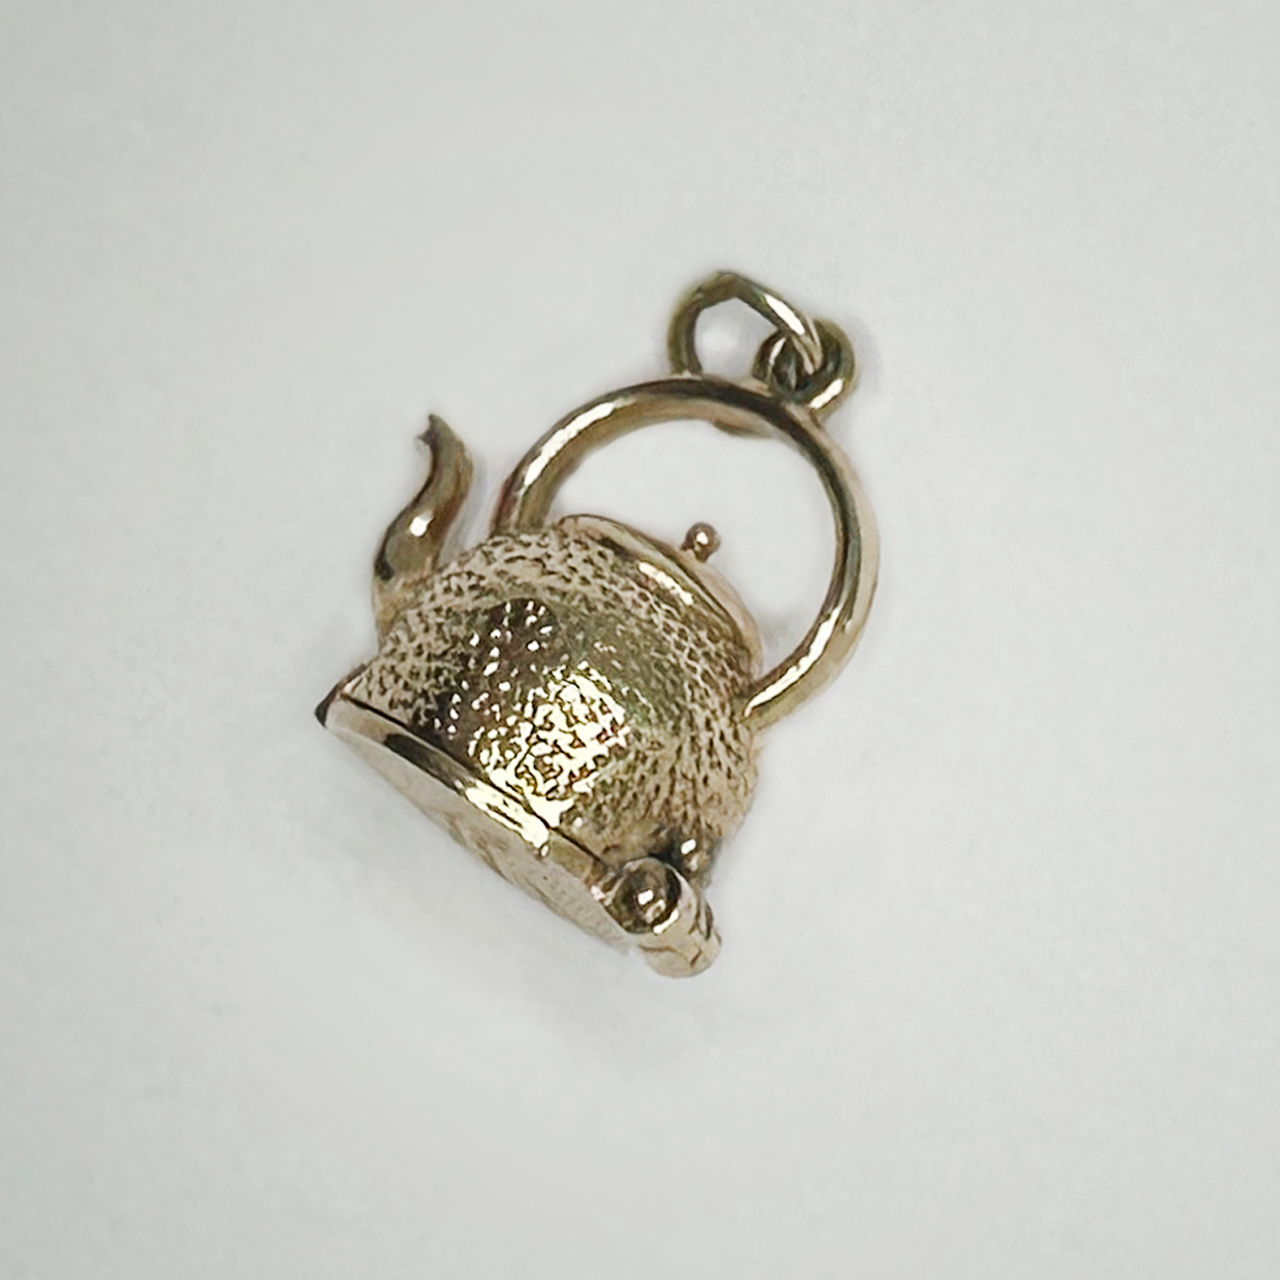 Kettle of Fish Gold Charm, textured dinky handled kettle which opens on a hinge on the bottom of the kettle to reveal fish. Hence the saying 'Kettle of Fish'. The charm has a full hallmark on the bottom Birmingham 1997. The hinge is in good working condition and intact. 